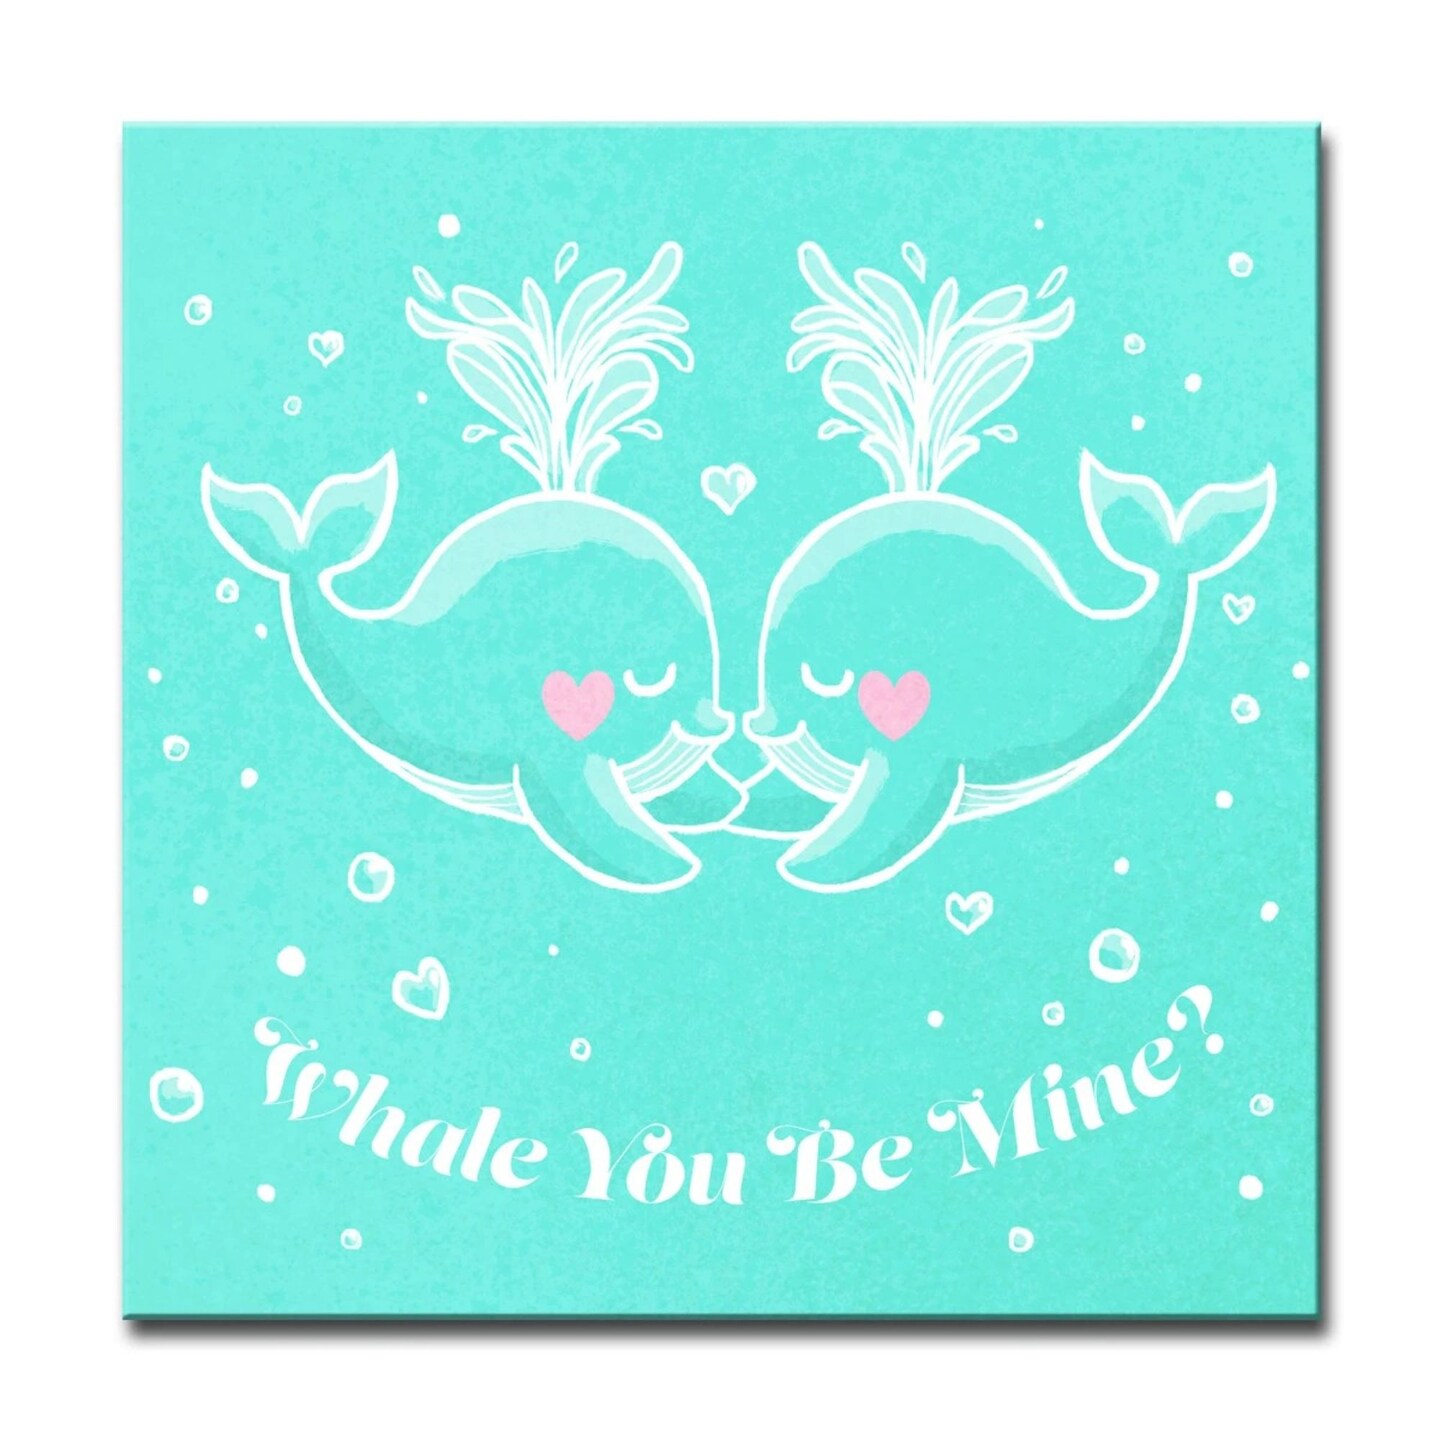 Crafted Creations Blue and White &#x22;Whale You Be Mine?&#x22; Square Canvas Wall Art 16&#x22; x 16&#x22;